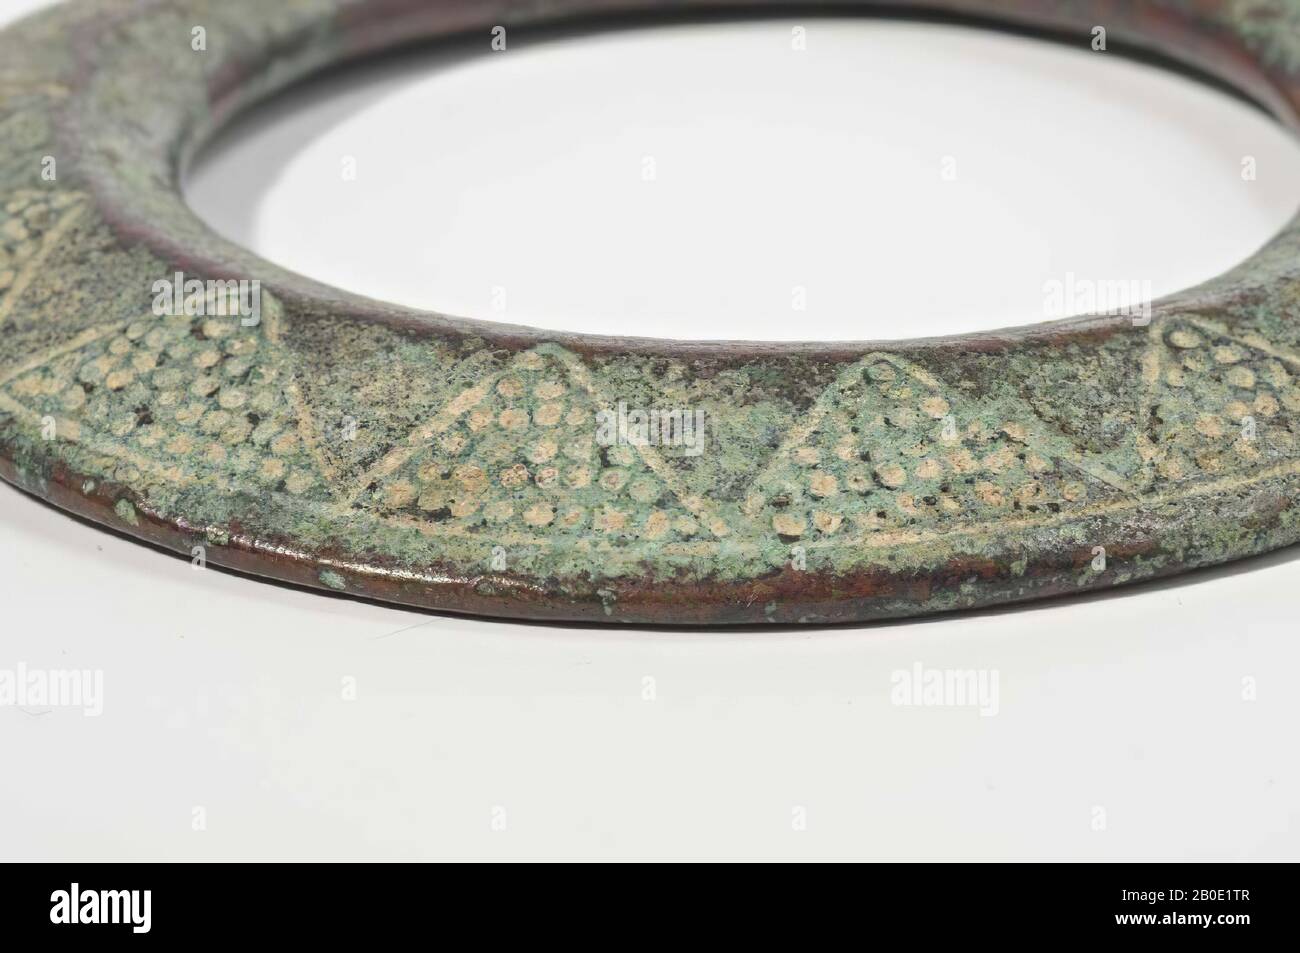 A bronze bridle ring decorated with 3-angular ornaments filled with dots, horse, metal, bronze, D 8.3 cm, Thickness 0.5 cm, Early Bronze Age III 2400-2000 BC, Iran Stock Photo